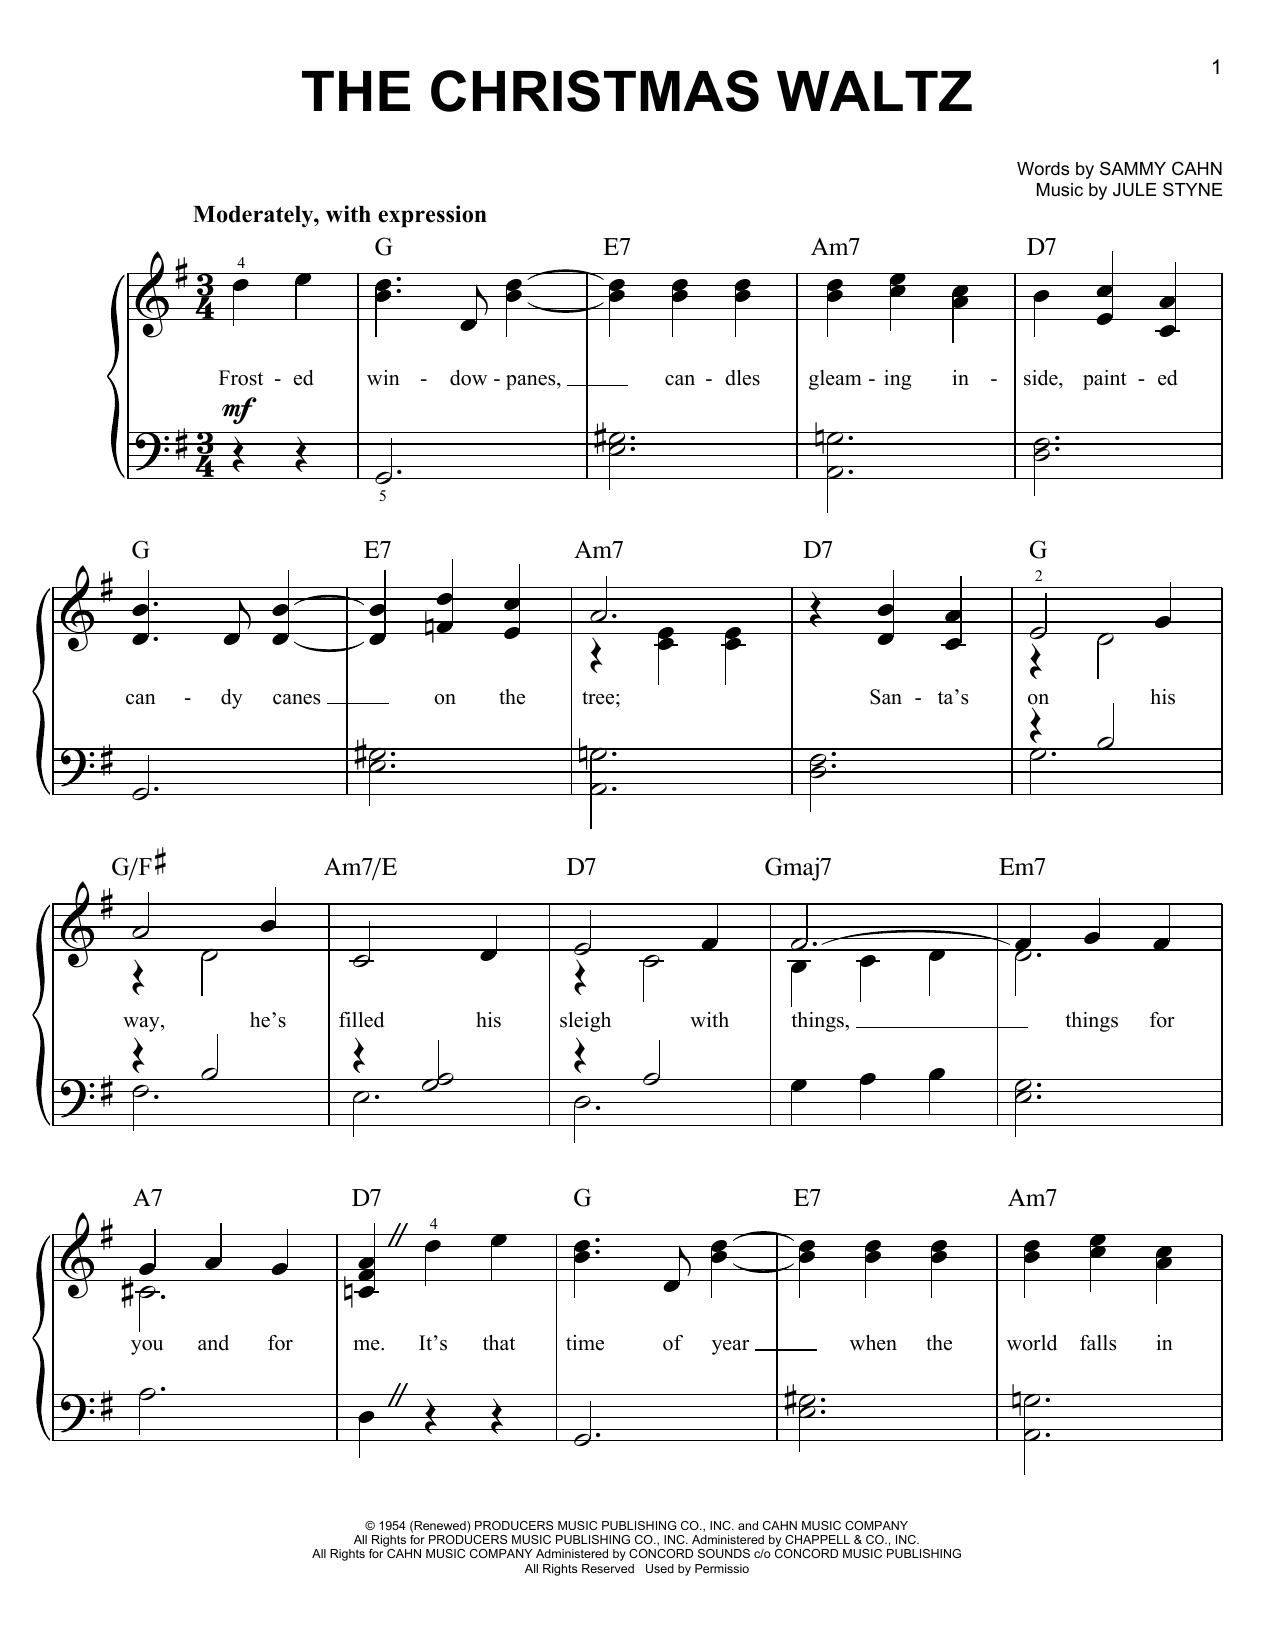 Frank Sinatra The Christmas Waltz sheet music notes and chords. Download Printable PDF.